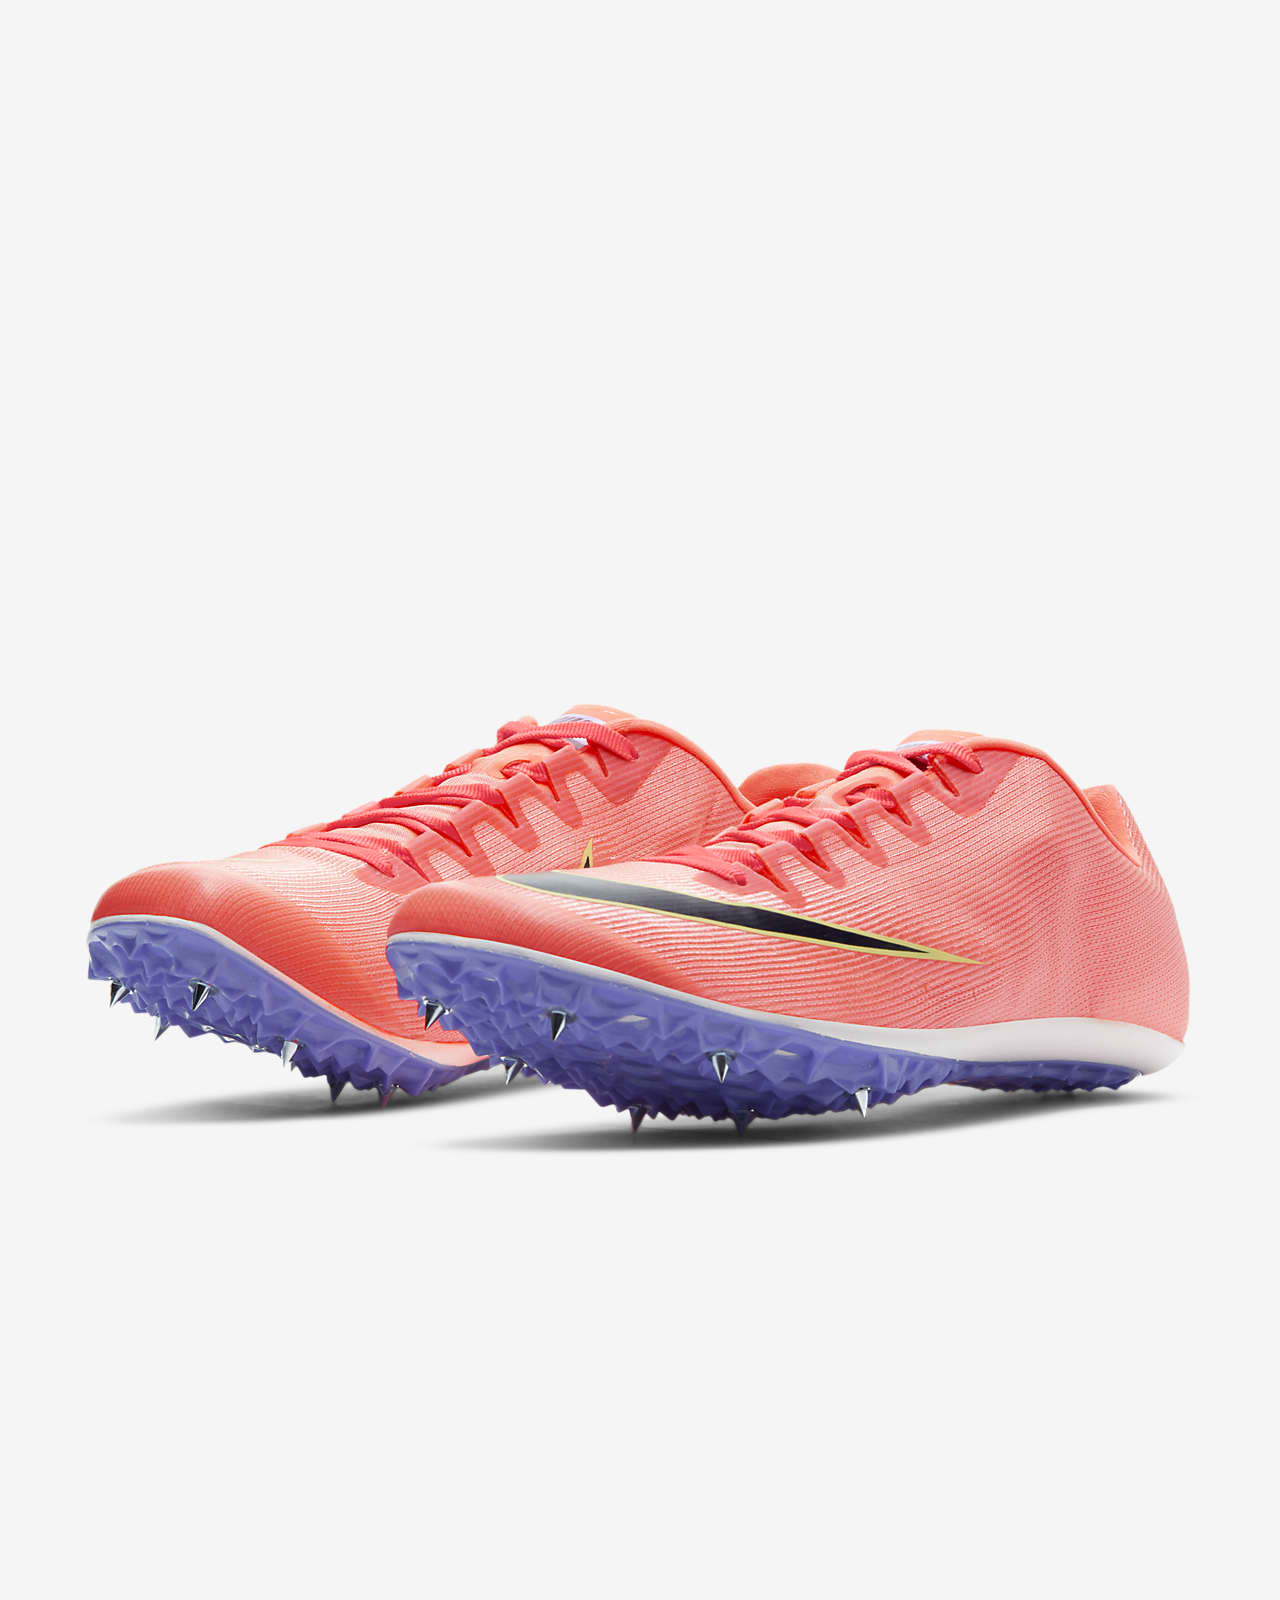 nike shoes with spikes